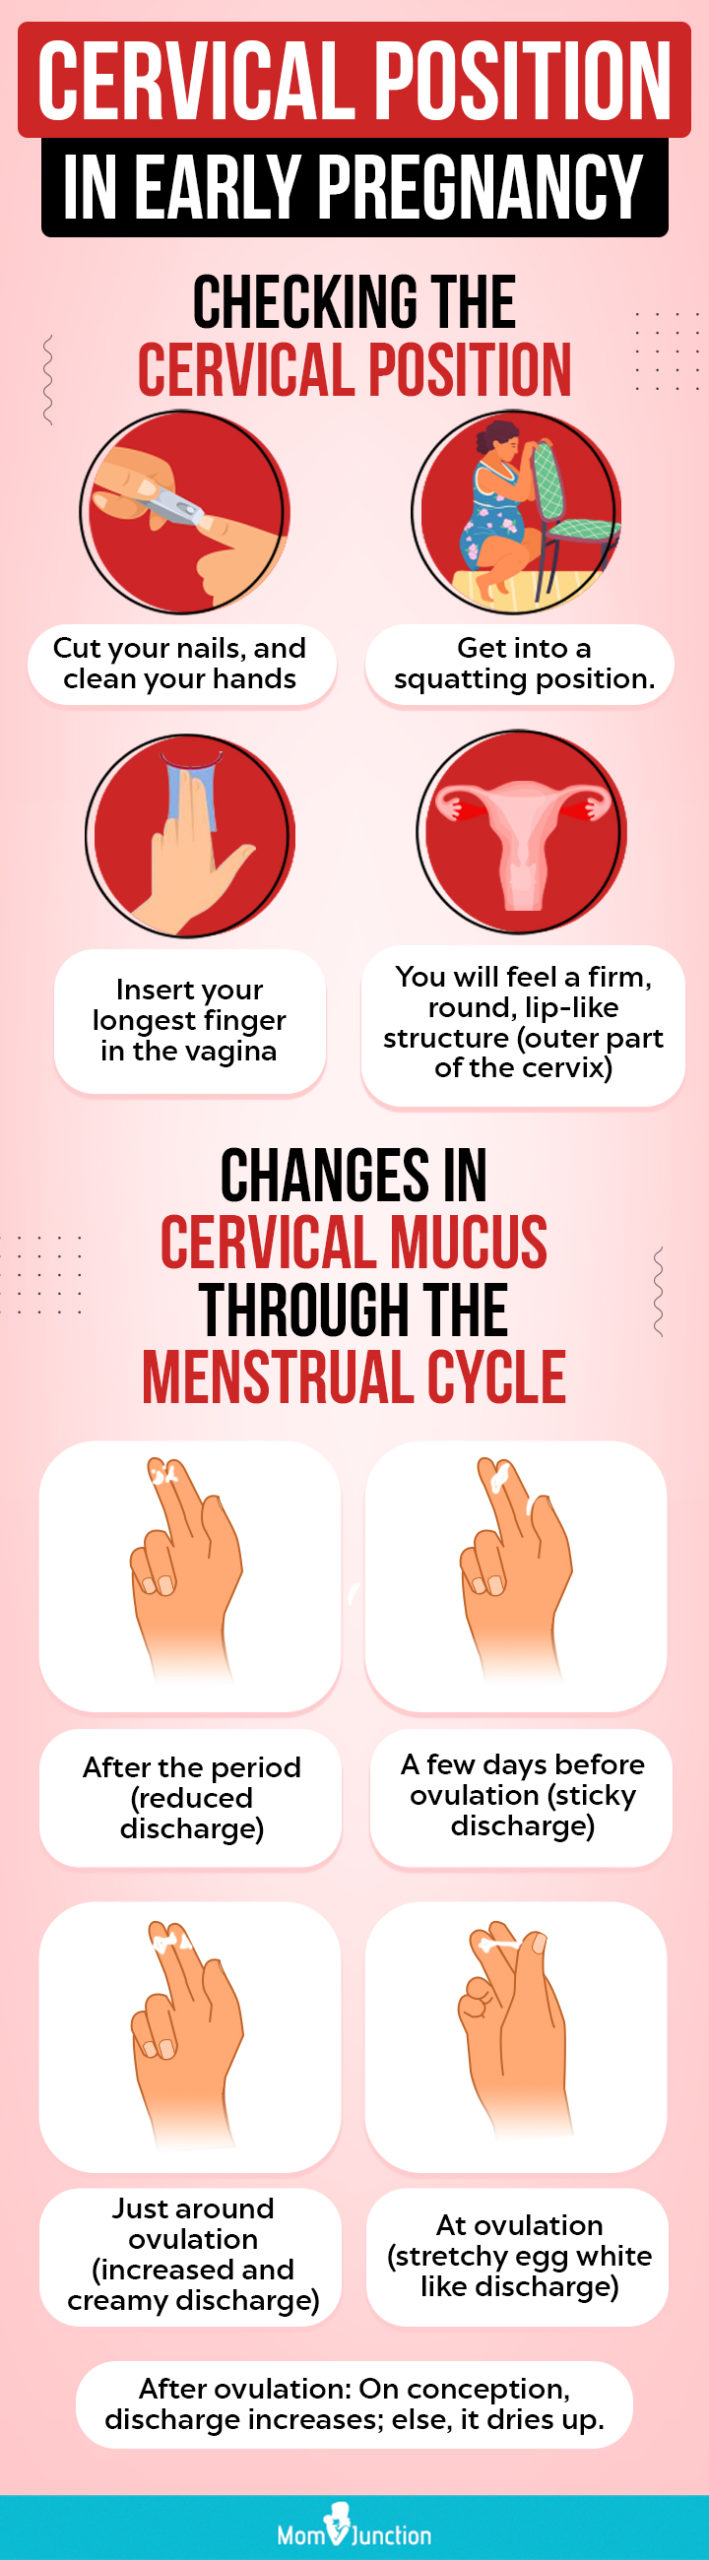 cervical position in early pregnancy [Infographic]